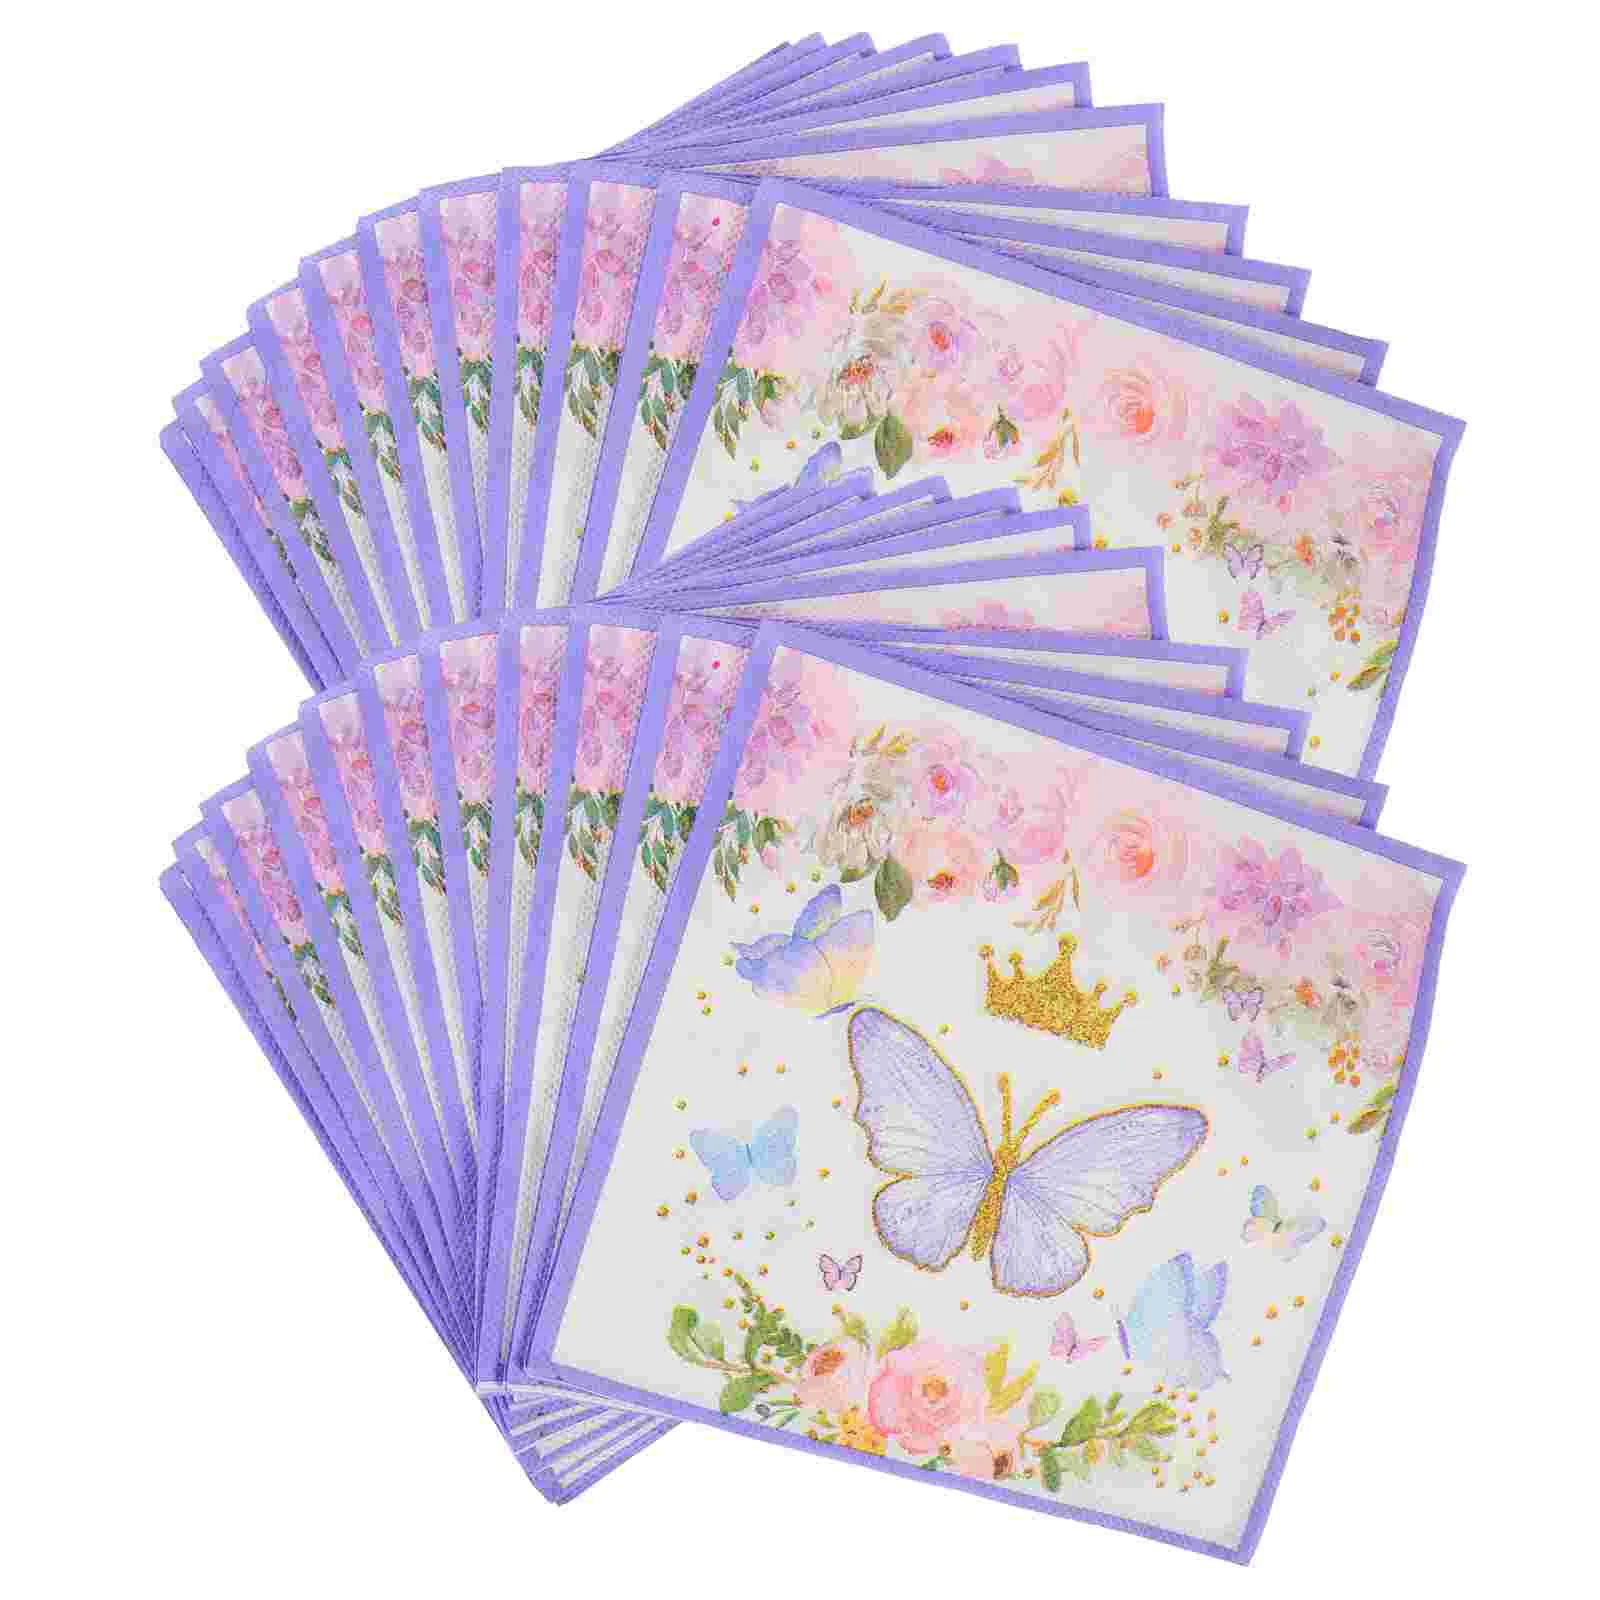 

100 Pcs Paper Napkin Towels Disposable Napkins Tissue Party Supplies Butterflies Printing Decorative Household Table